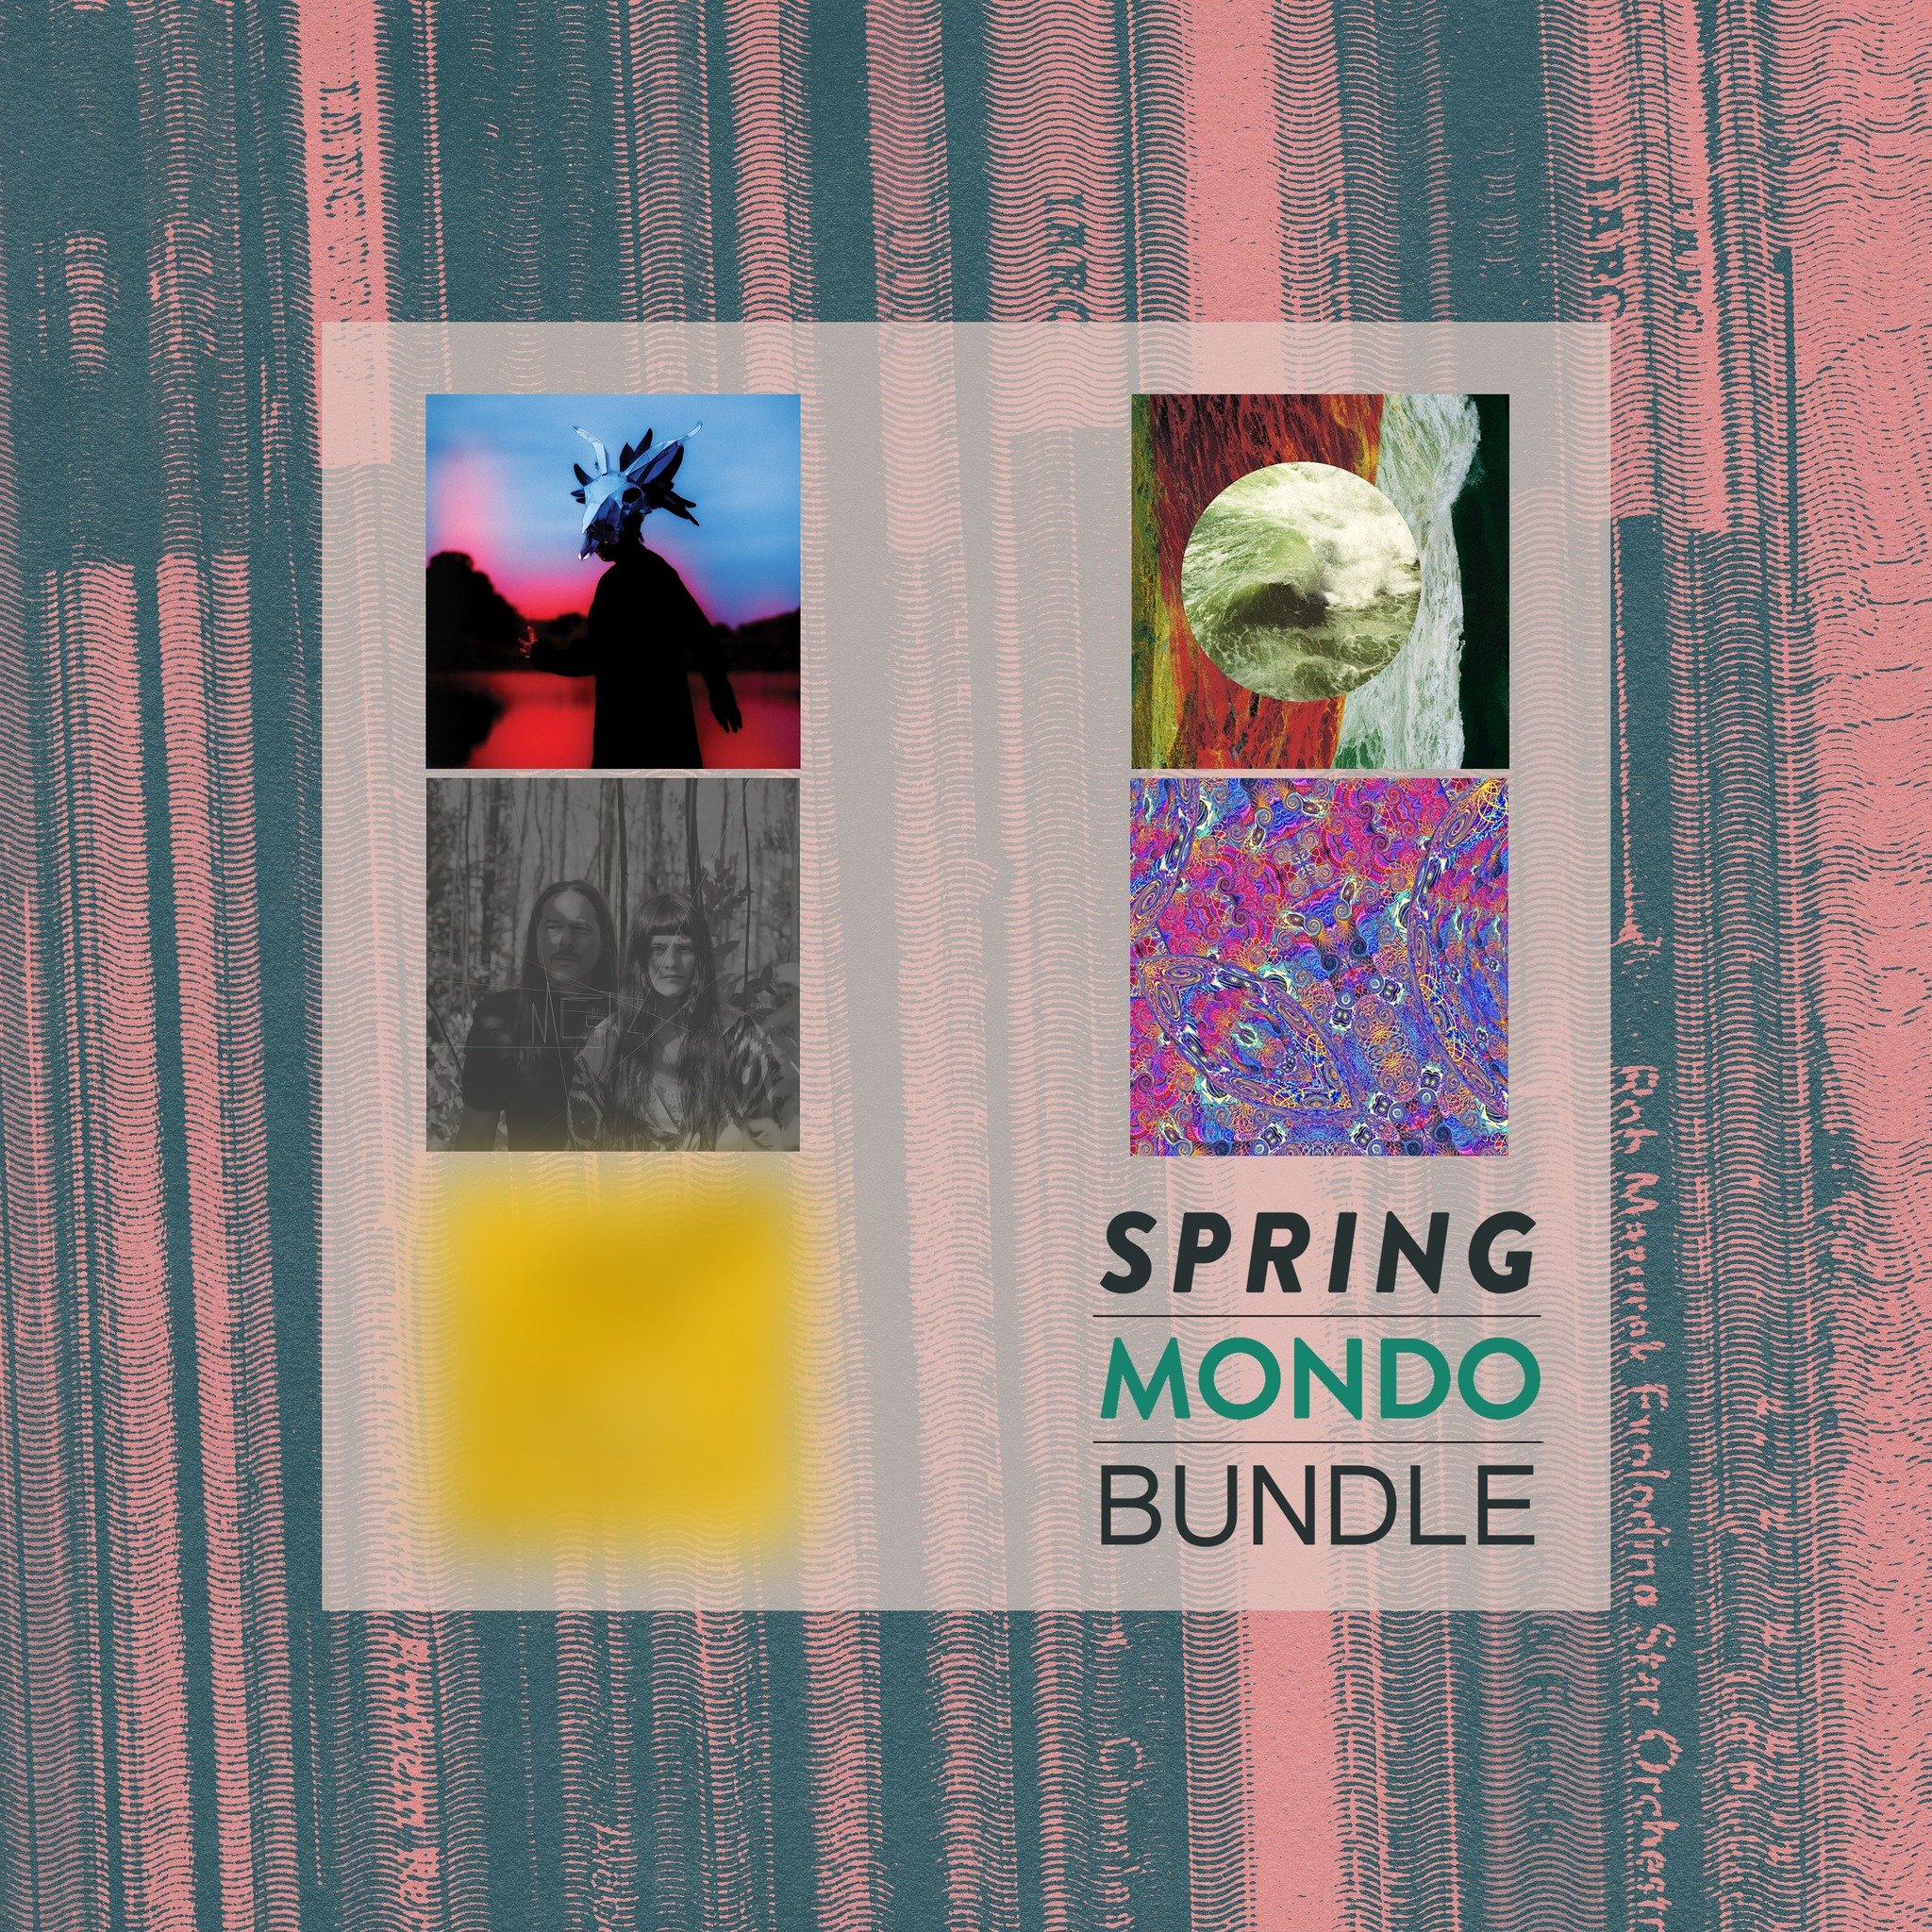 LAST CALL! Our 𝗦𝗽𝗿𝗶𝗻𝗴 𝗠𝗼𝗻𝗱𝗼 𝗕𝘂𝗻𝗱𝗹𝗲 is available for purchase till 11:59pm Chicago time tomorrow, Tuesday April 16th.

The Spring Mondo Bundle collects all 5 of our Spring releases into a single beautiful parcel - allowing you to save